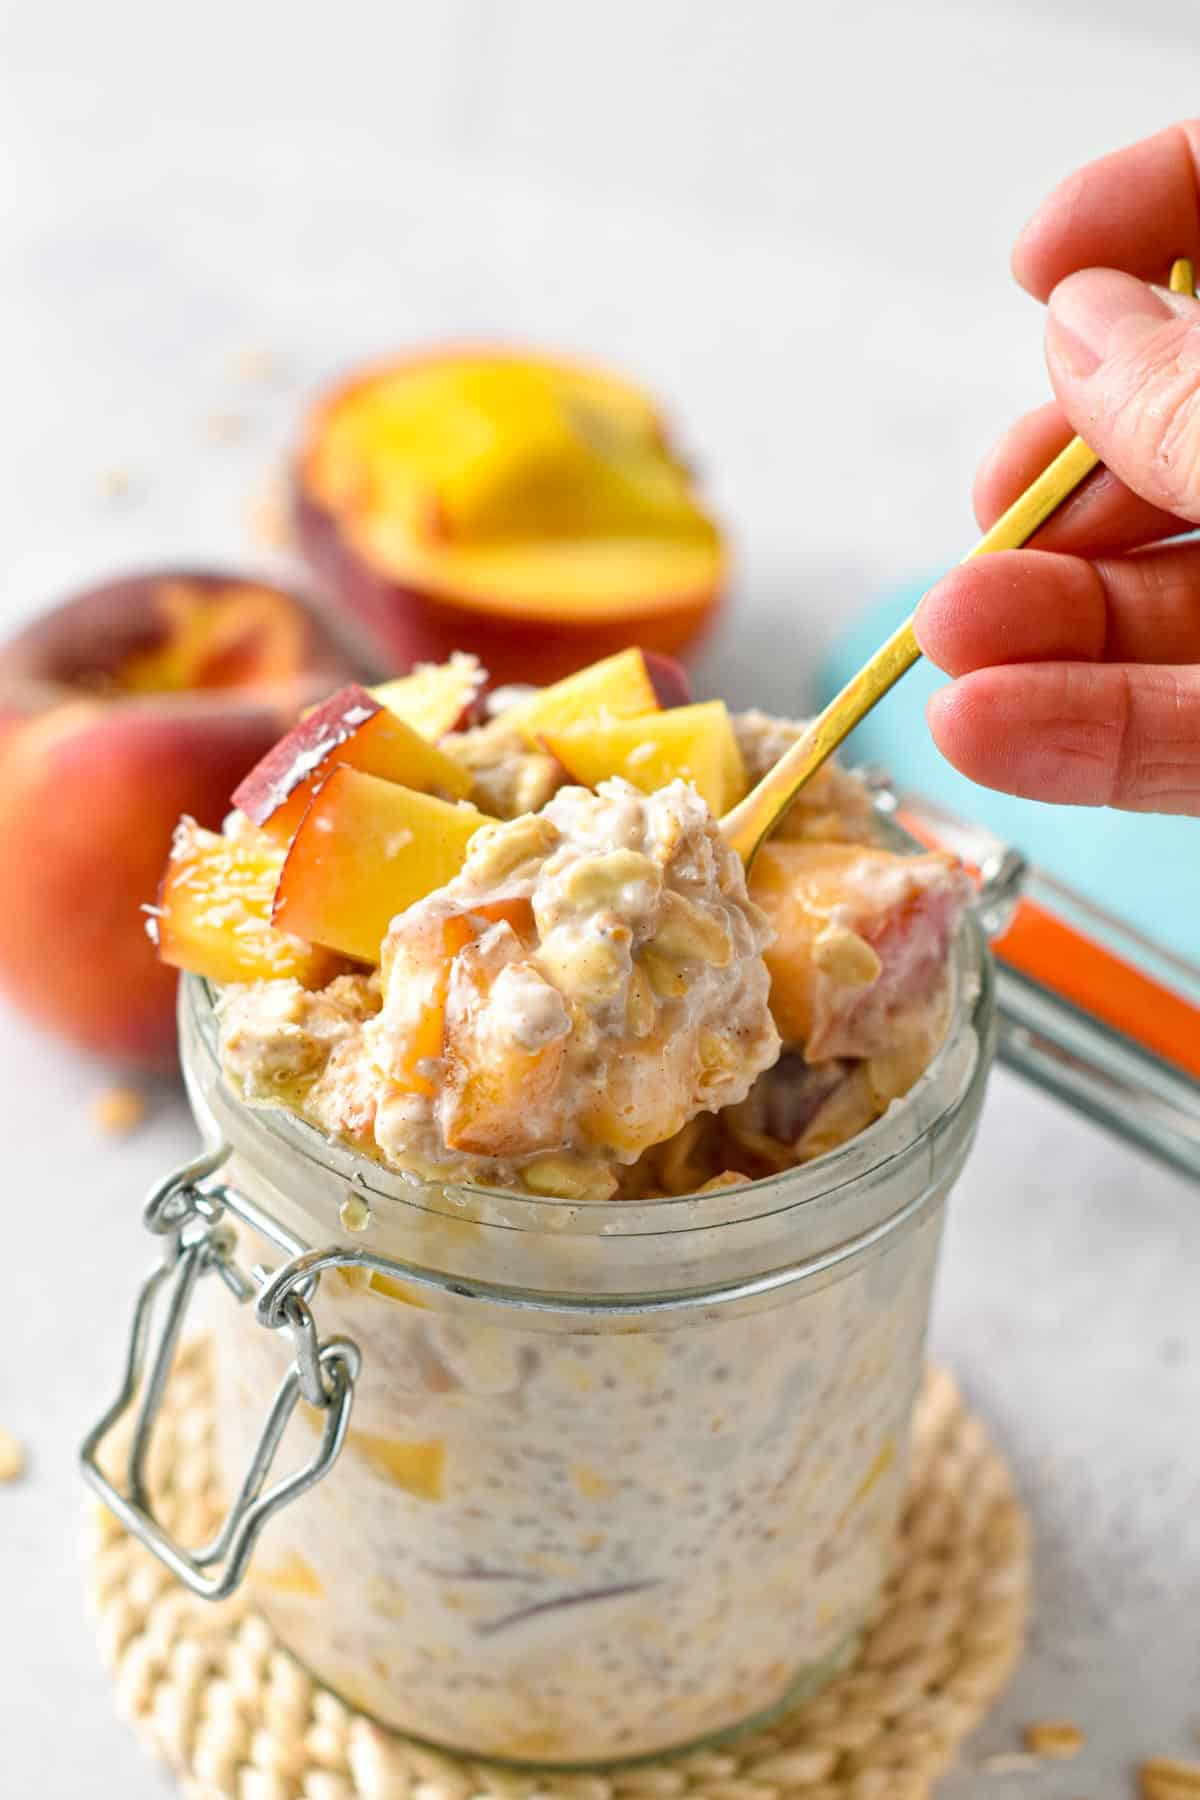  This Peach Overnights Oats recipe is a delicious creamy, refreshing healthy breakfast with fresh peaches. Plus, it's a naturally plant-based breakfast too with easy gluten-free option.